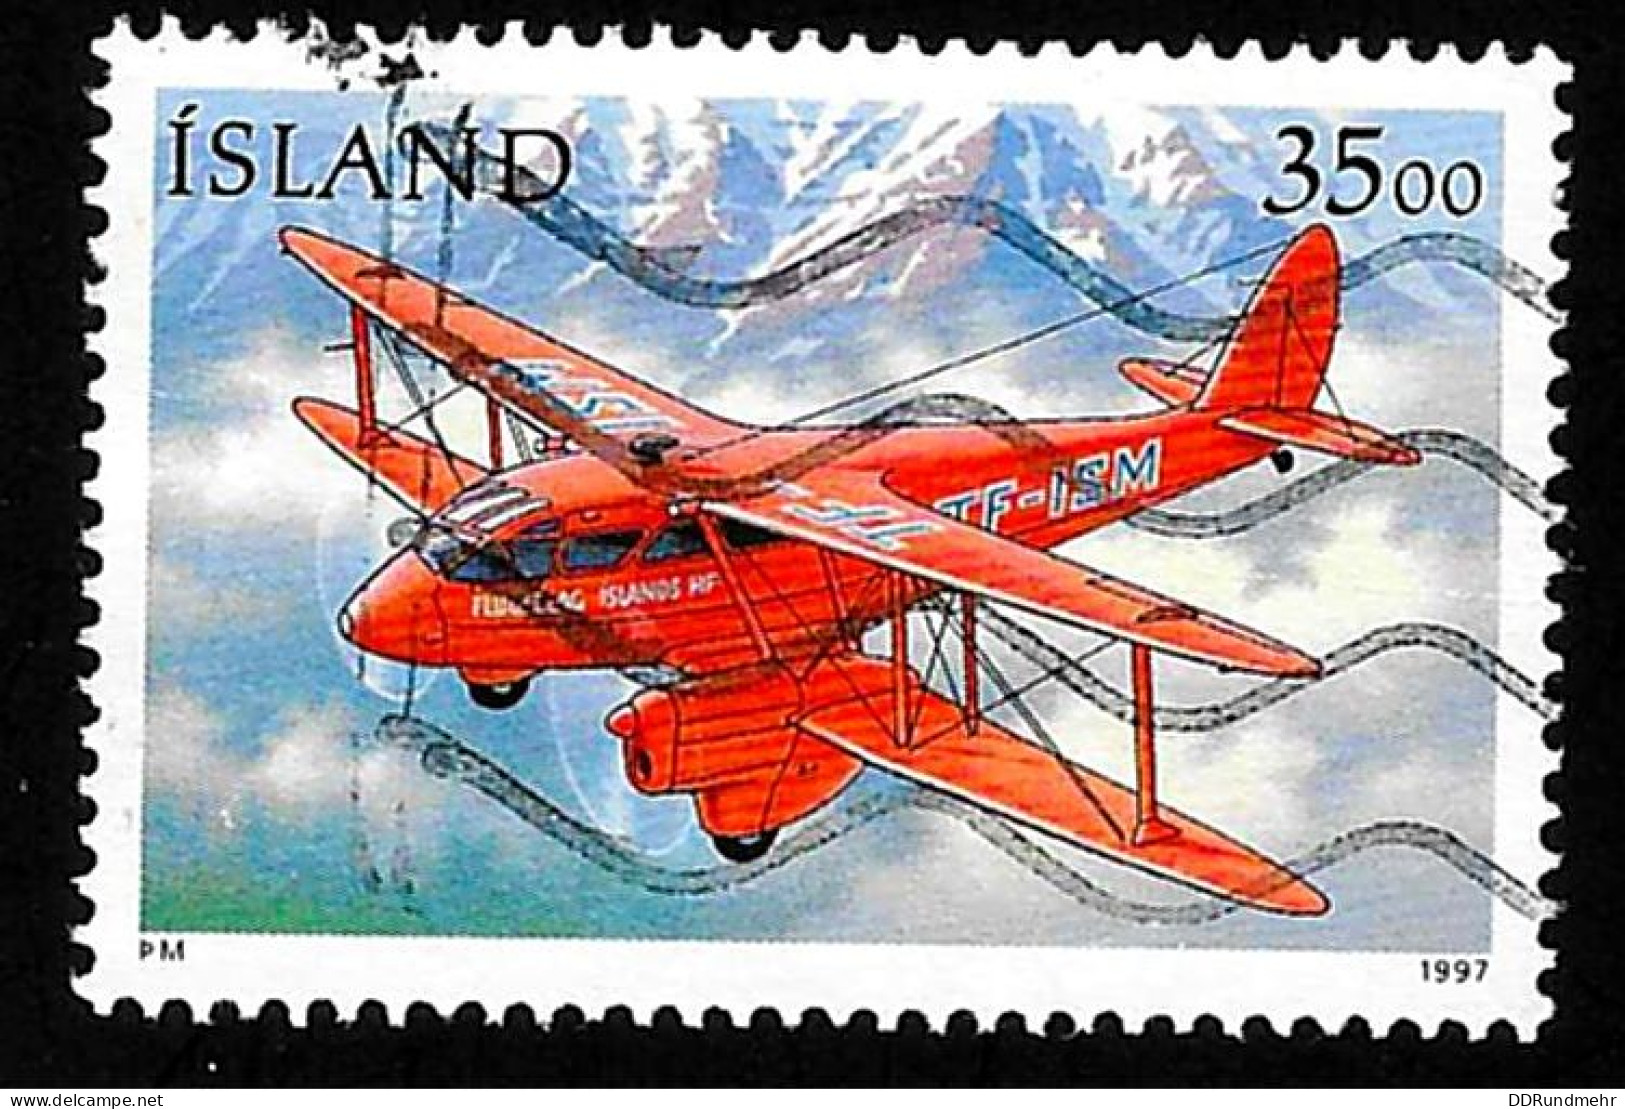 1997 Postal Aircrafts  Michel IS 866 Stamp Number IS 838 Stanley Gibbons IS 879 Used - Gebraucht